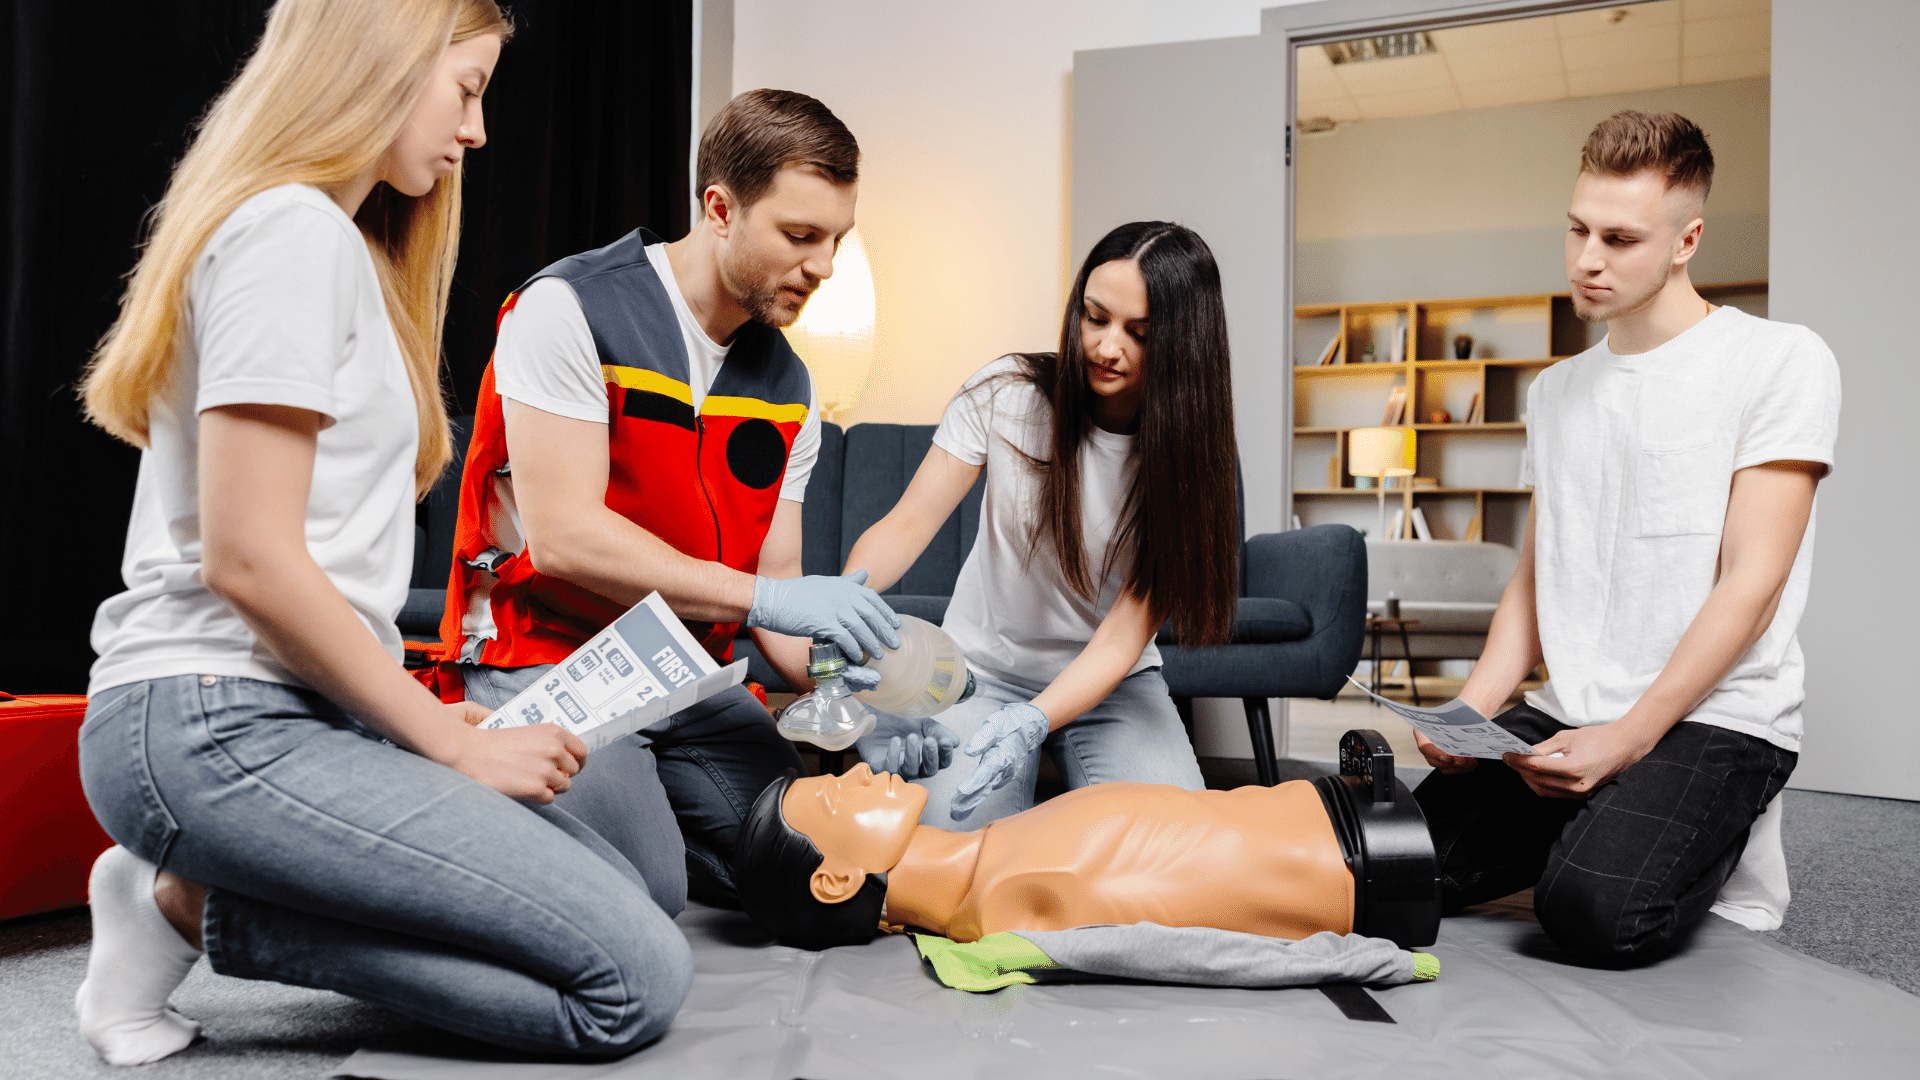 Group of people learning how to perform CPR on a dummy.